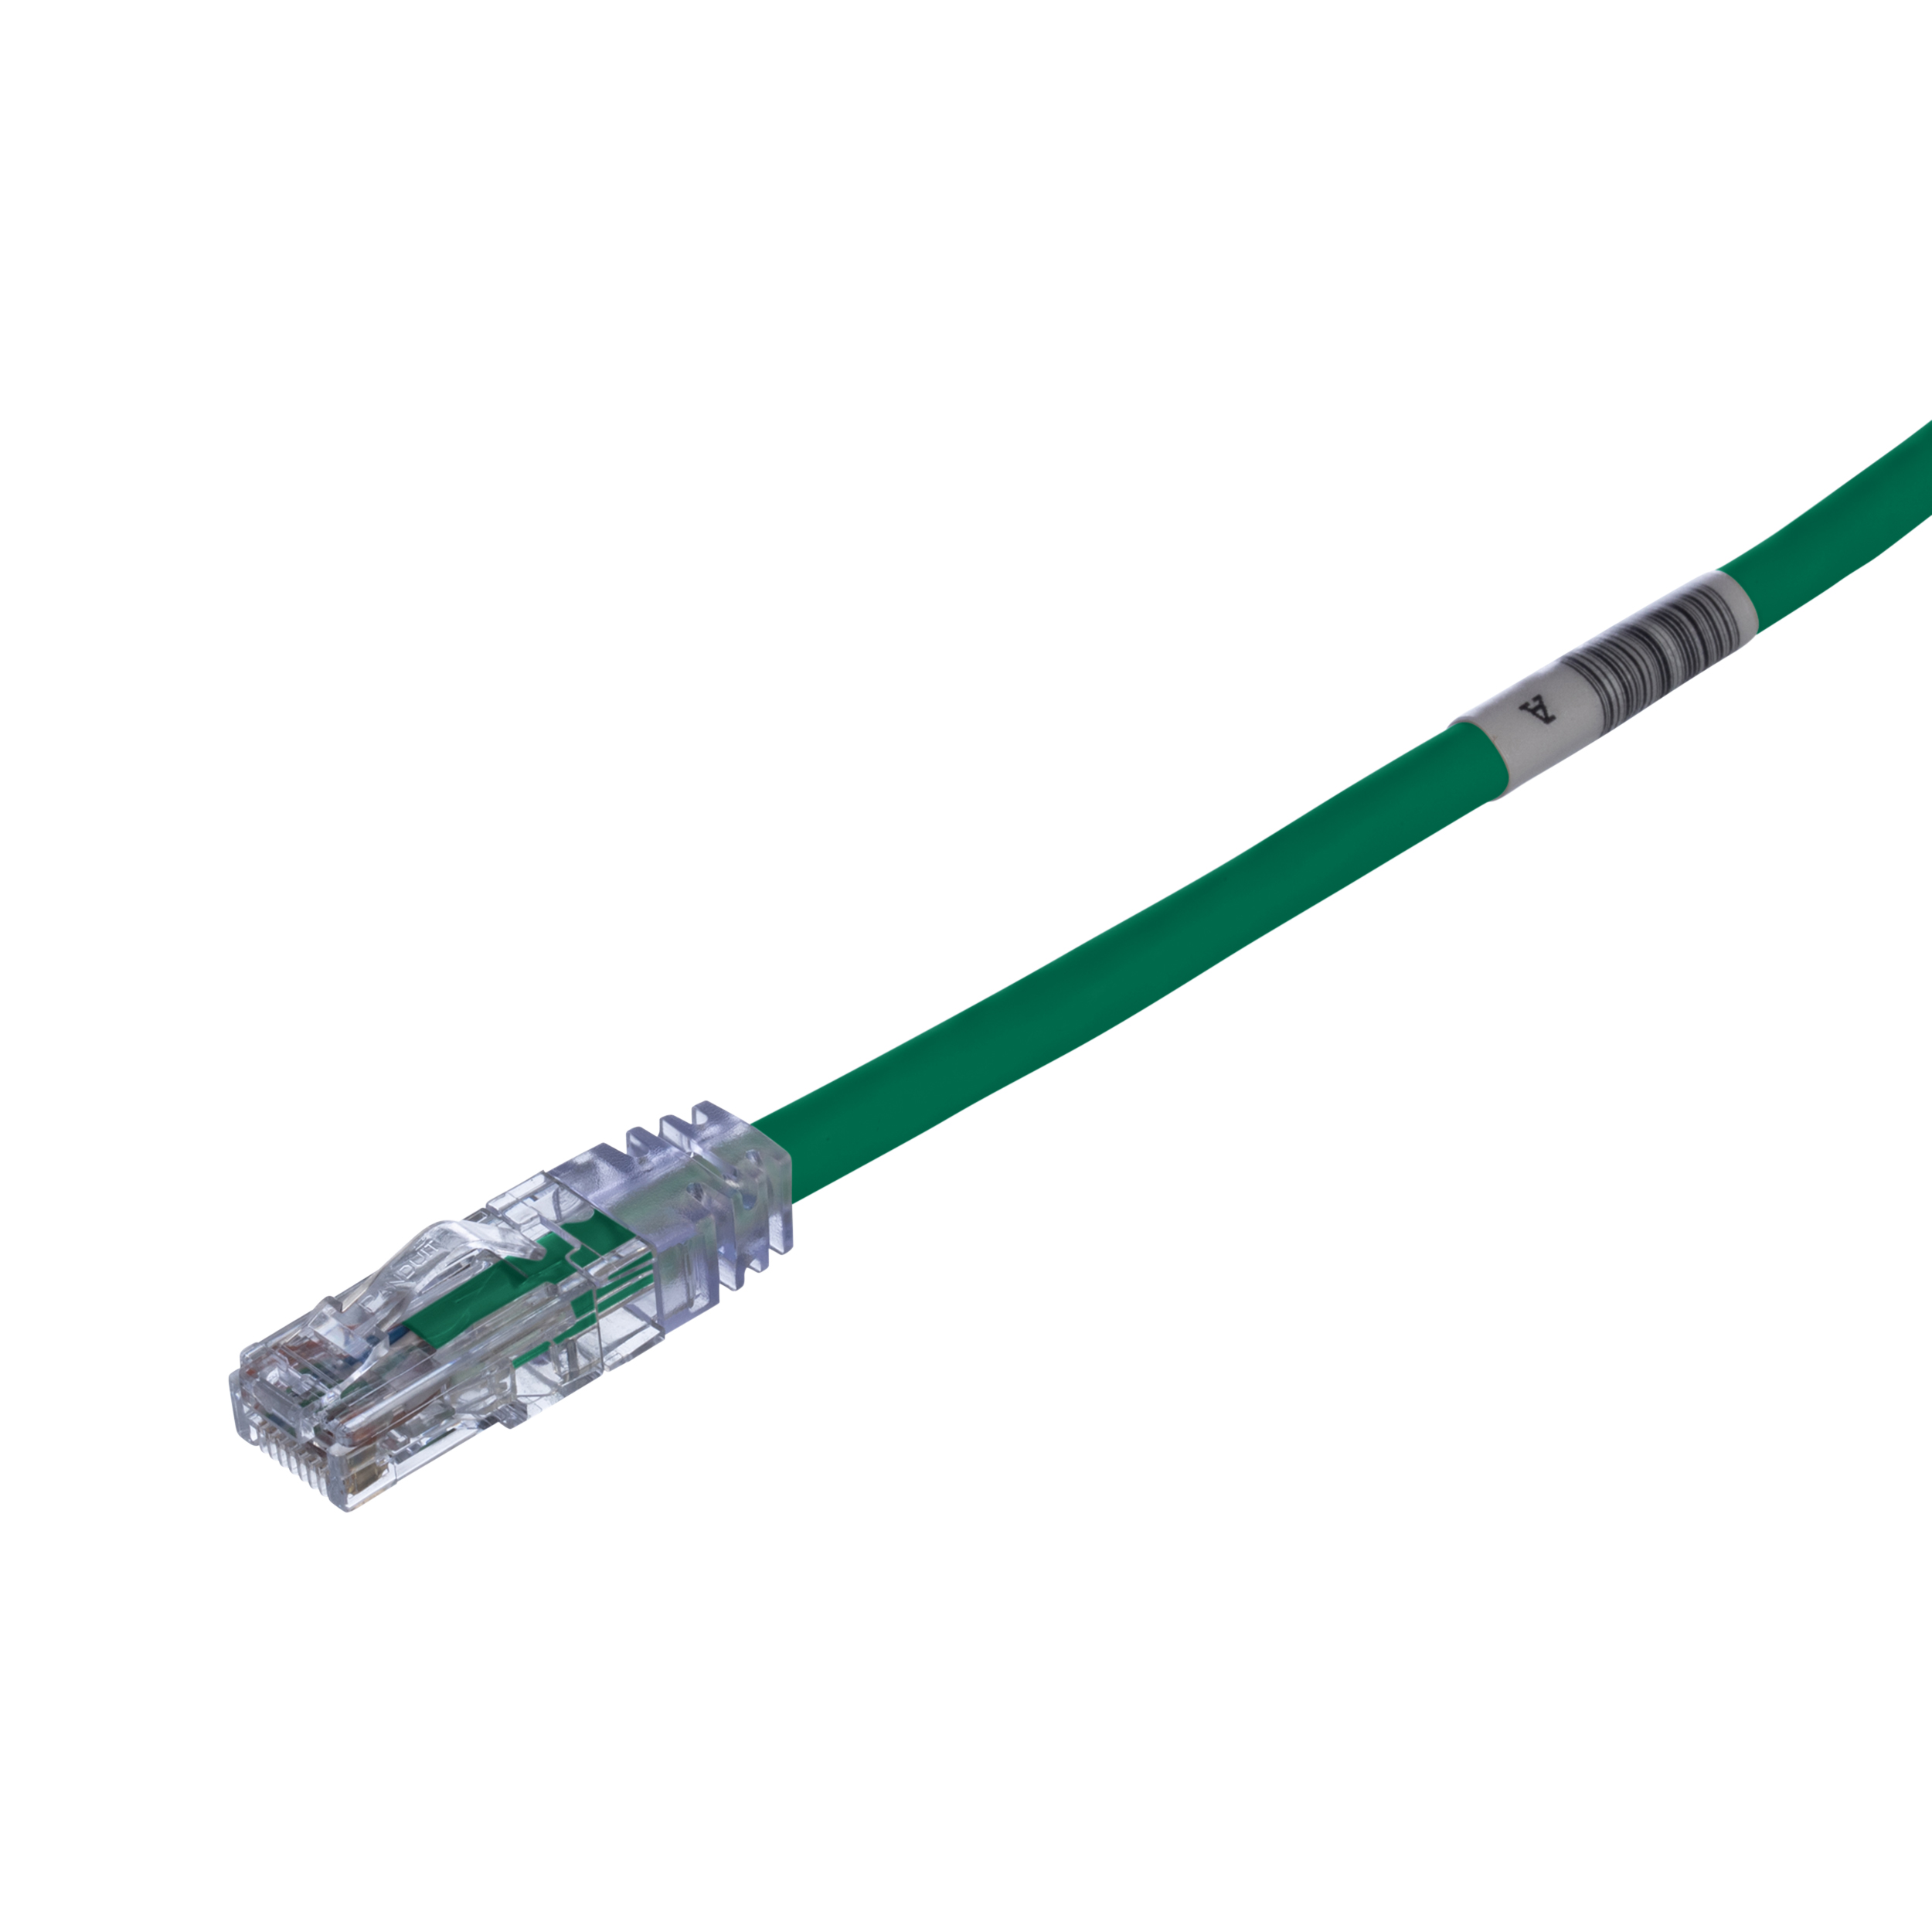 Cat 6 24 AWG UTP Copper Patch Cord, 2.5 m, Green